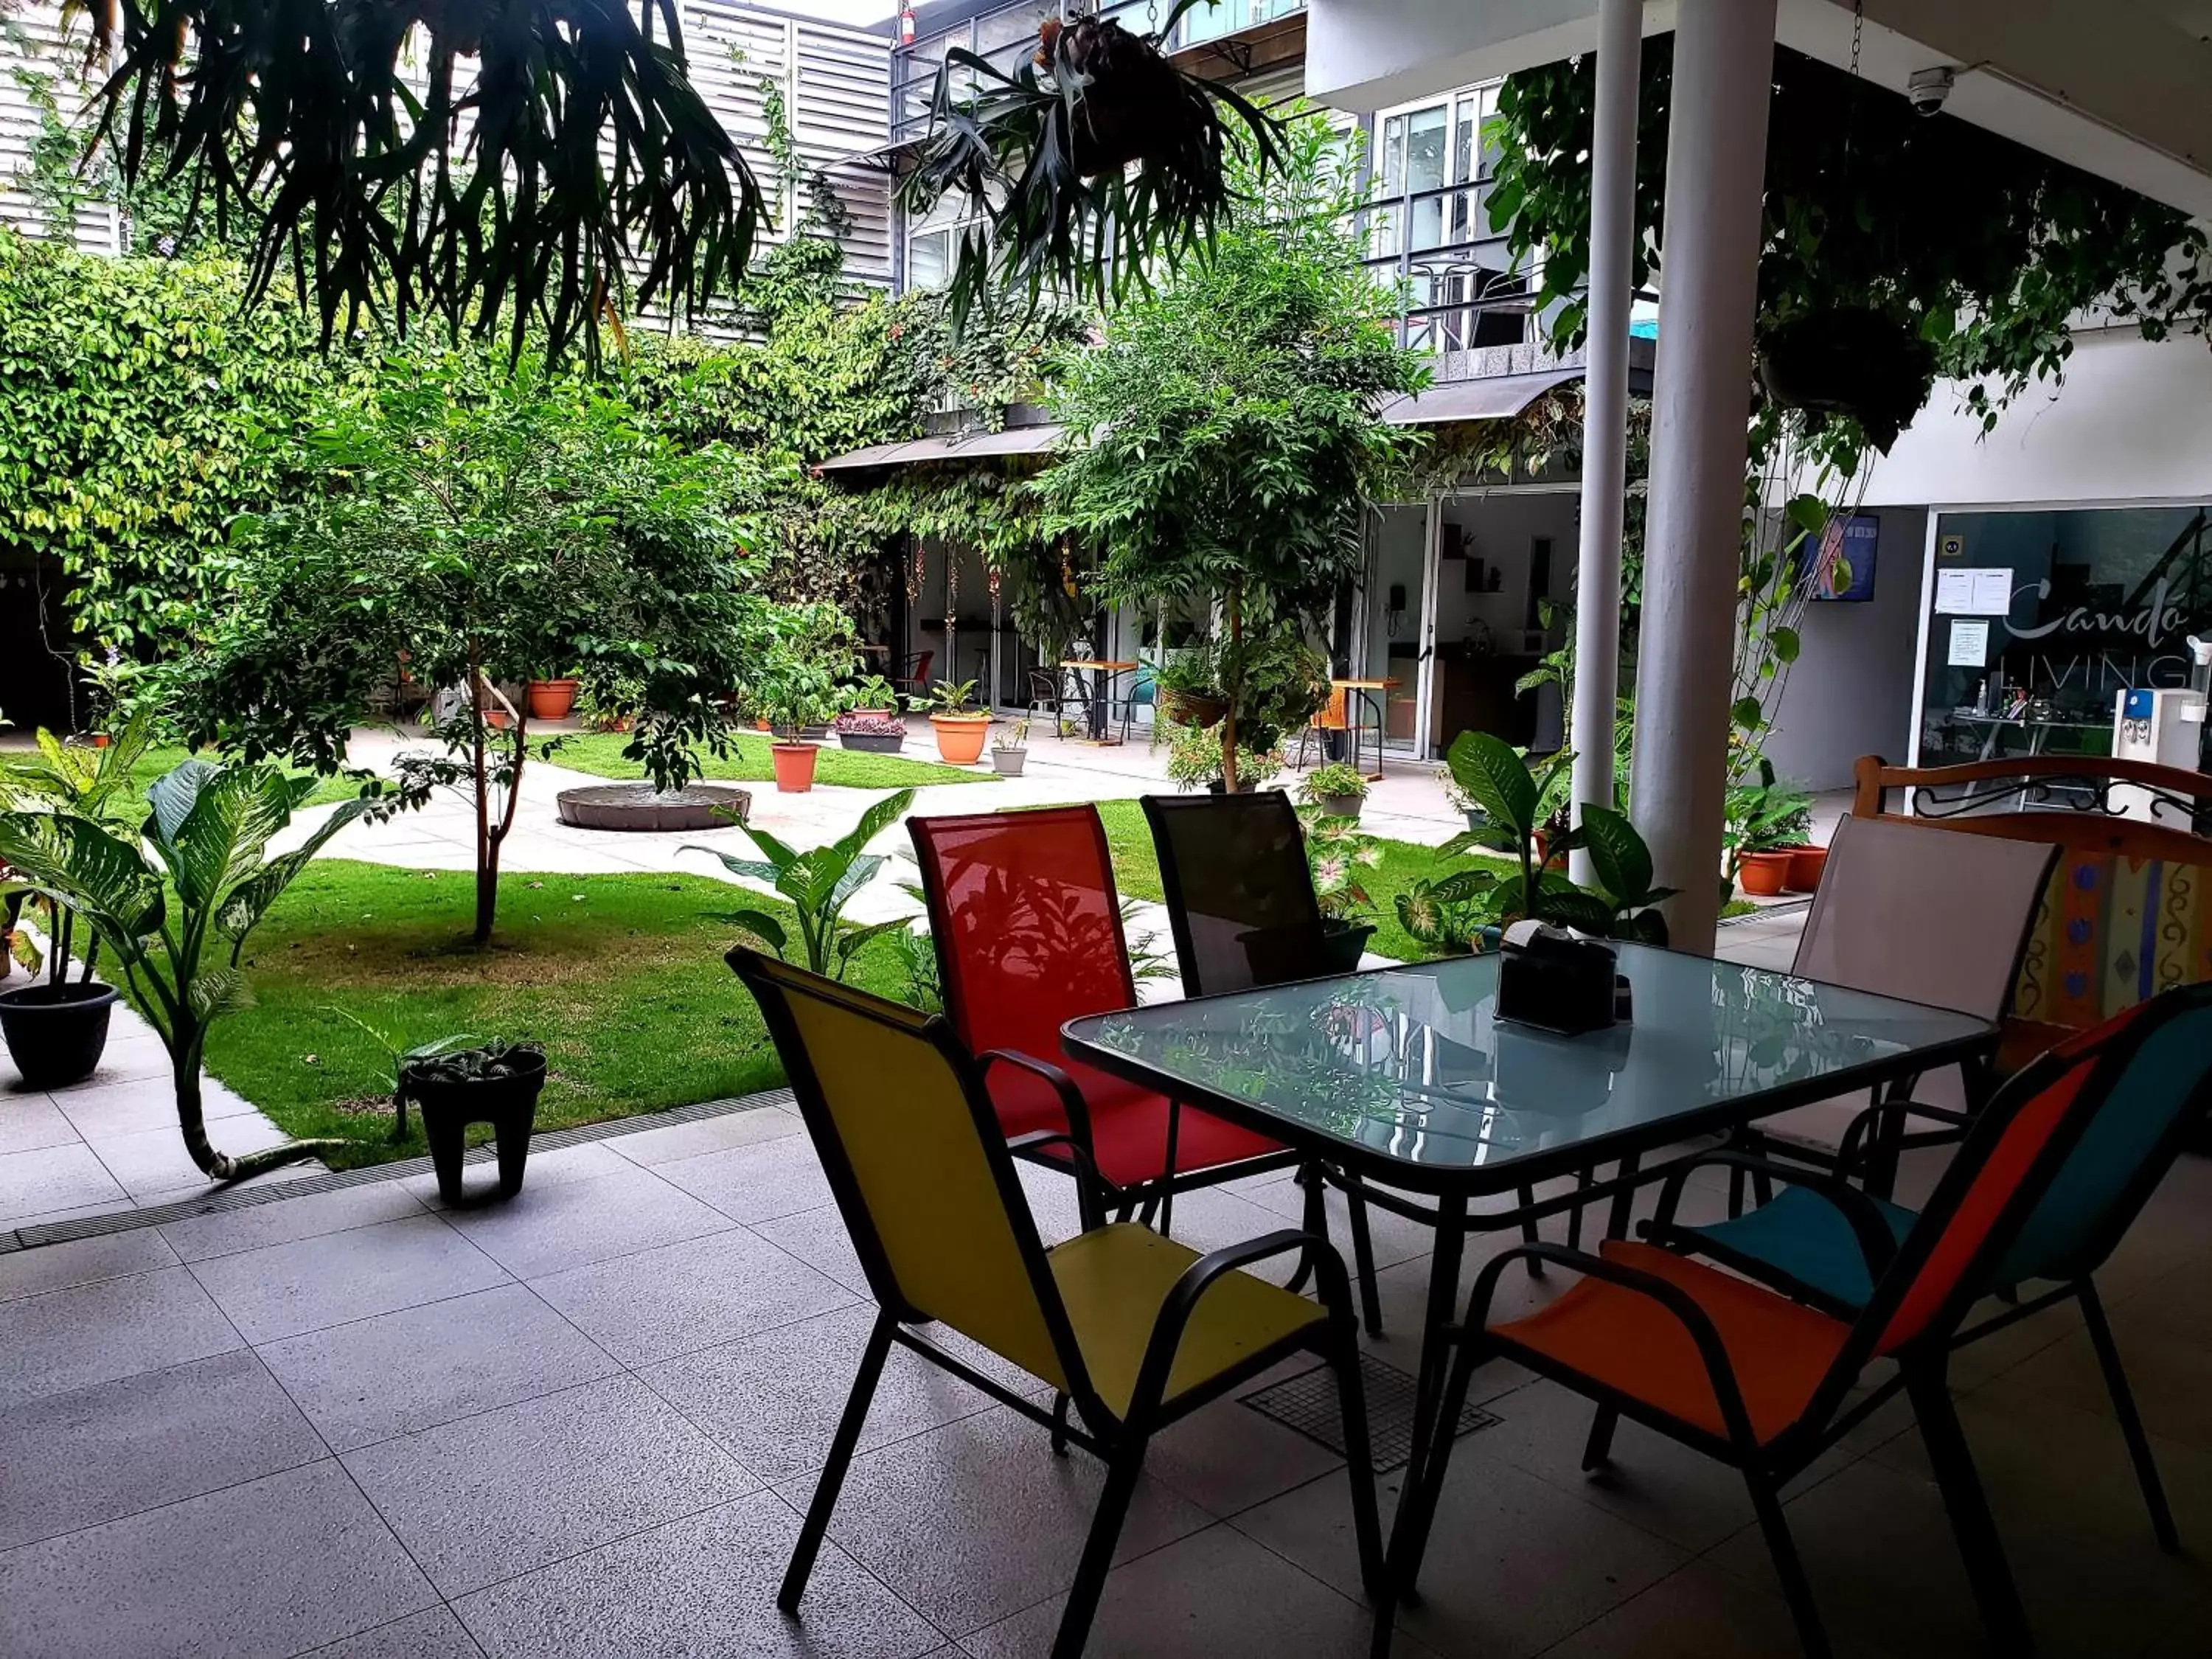 Inner courtyard view in Cando Living Apartments in Central Avenue